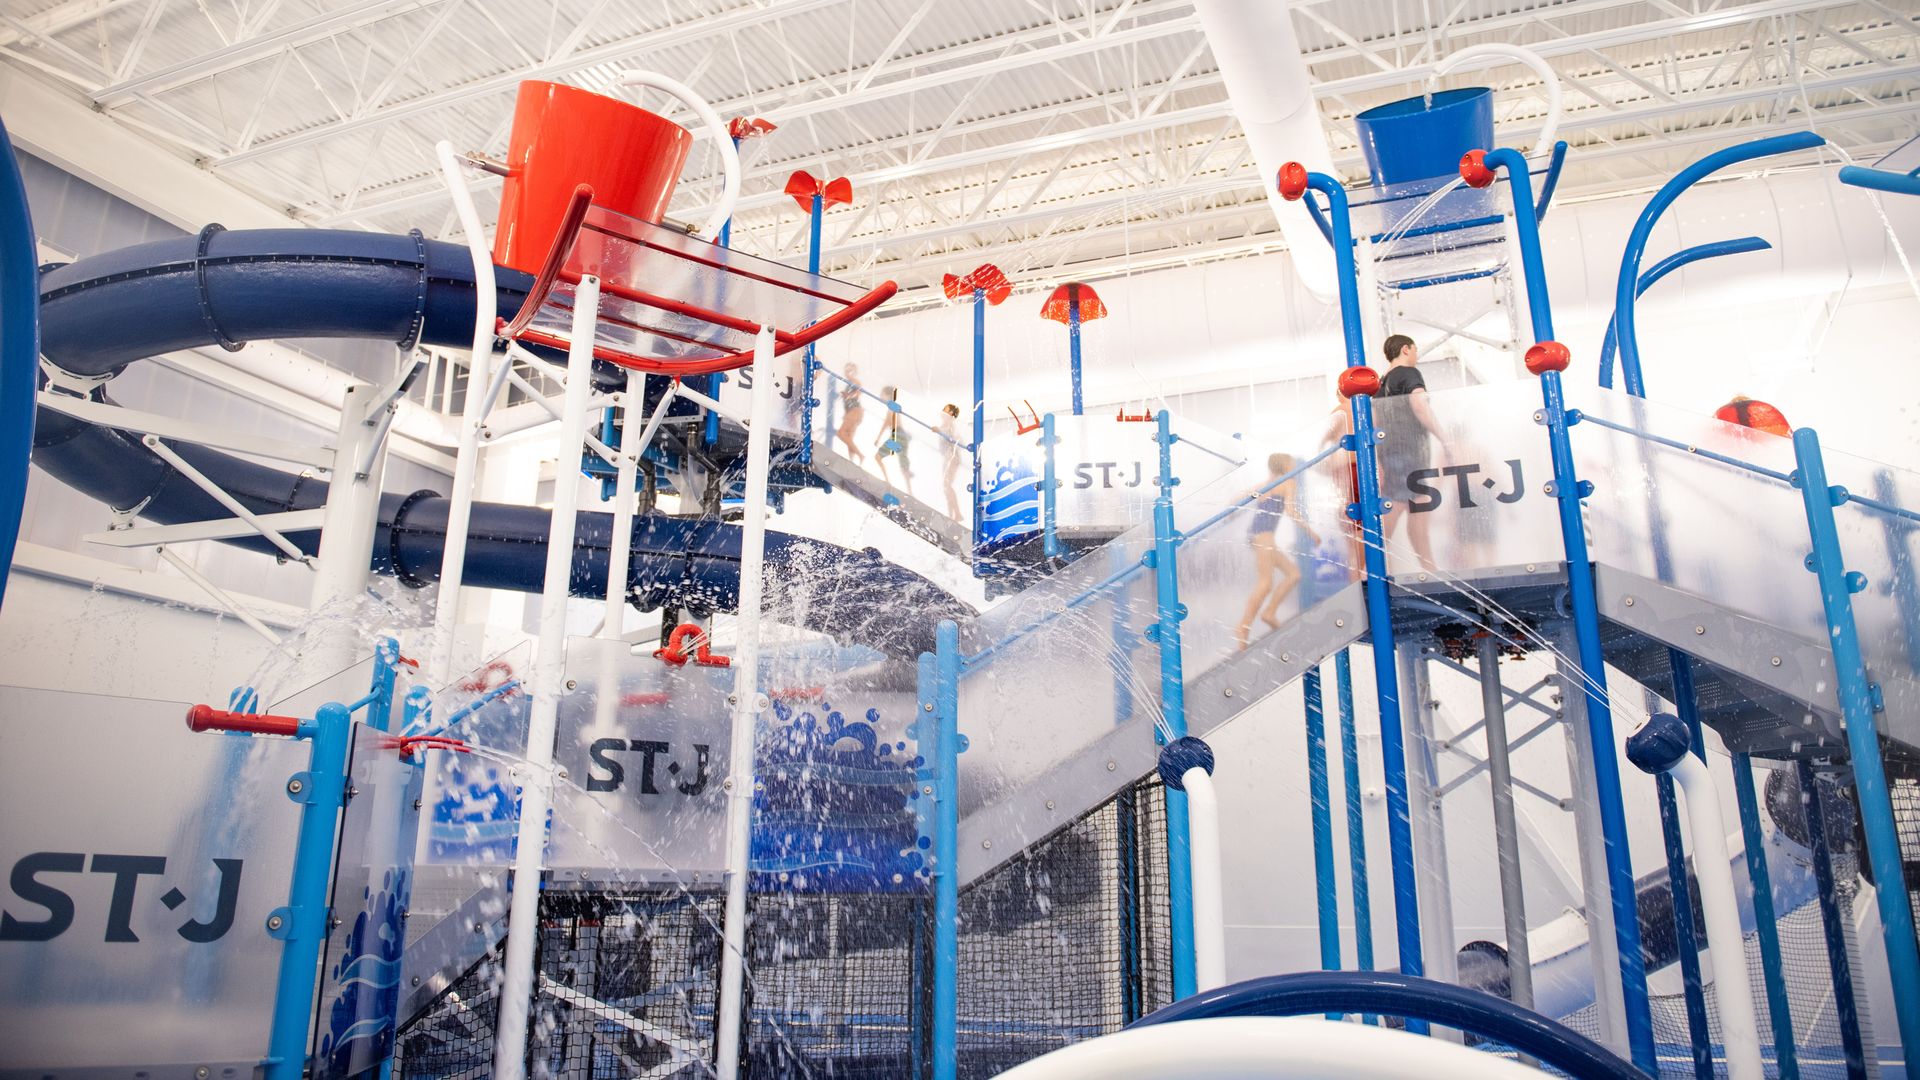 An indoor water park with a spiraling slide and water buckets.